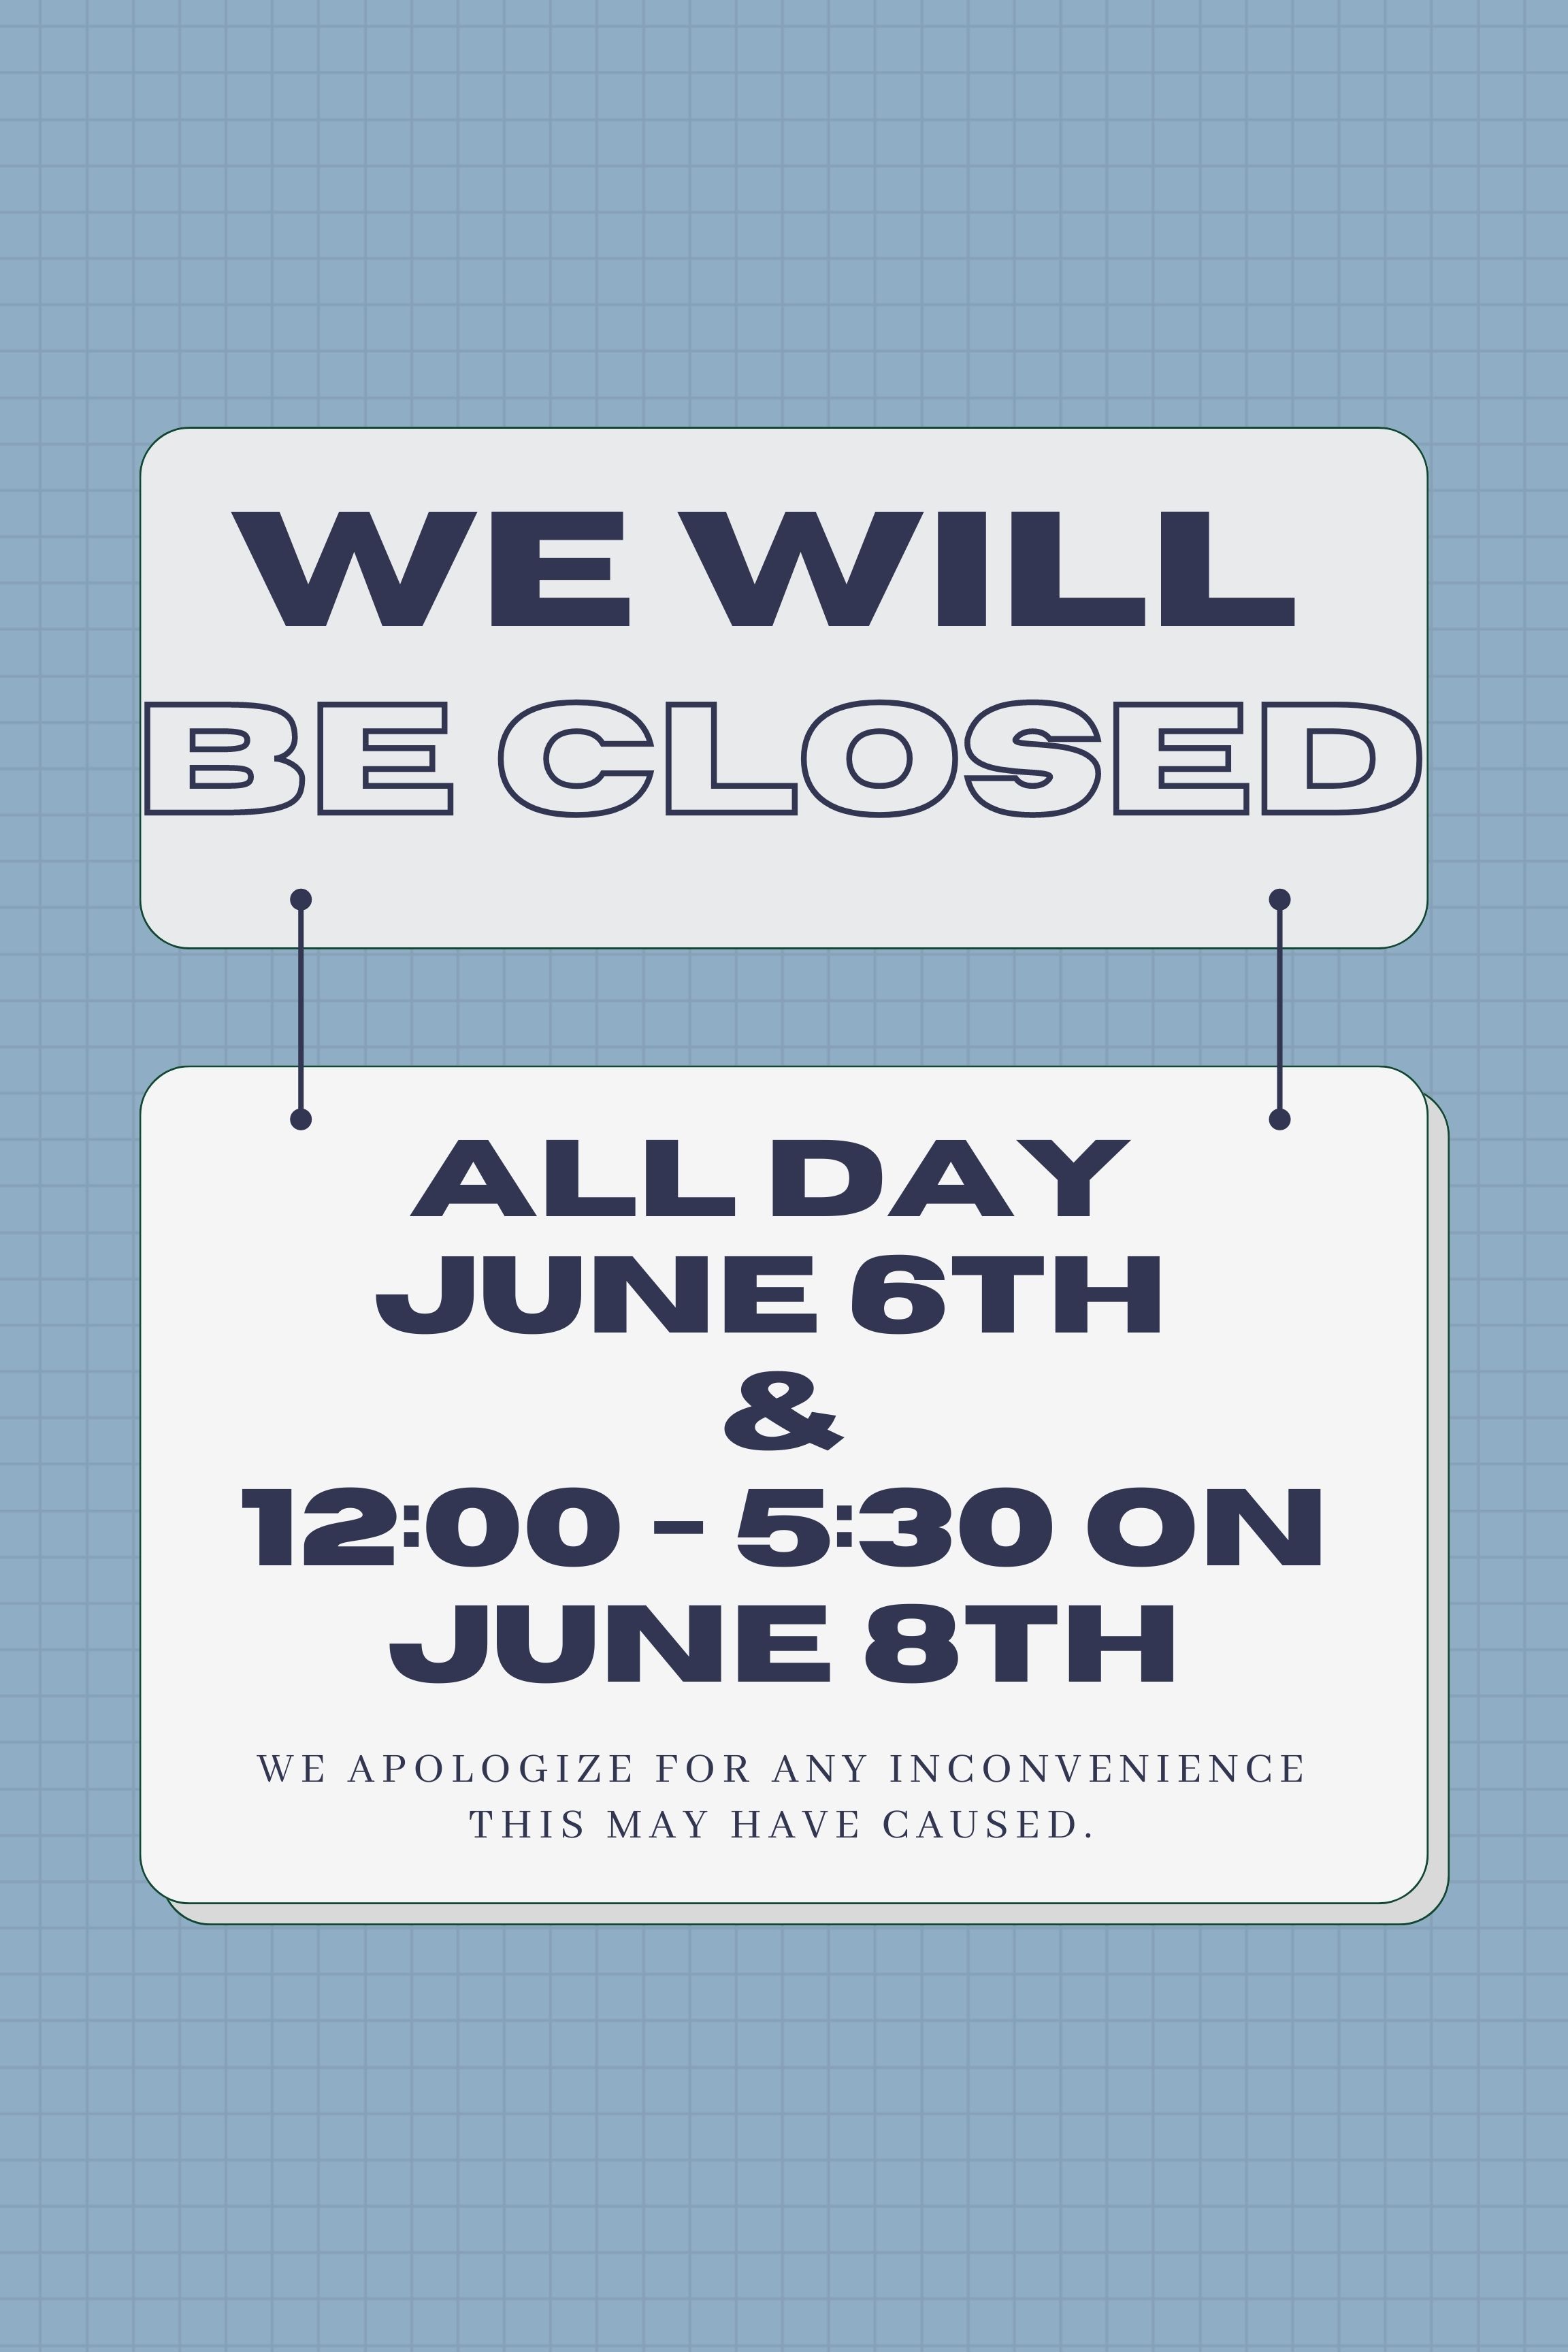 Closed all day June 6 thand Closed from 1200 to 530 on June 8th.jpg